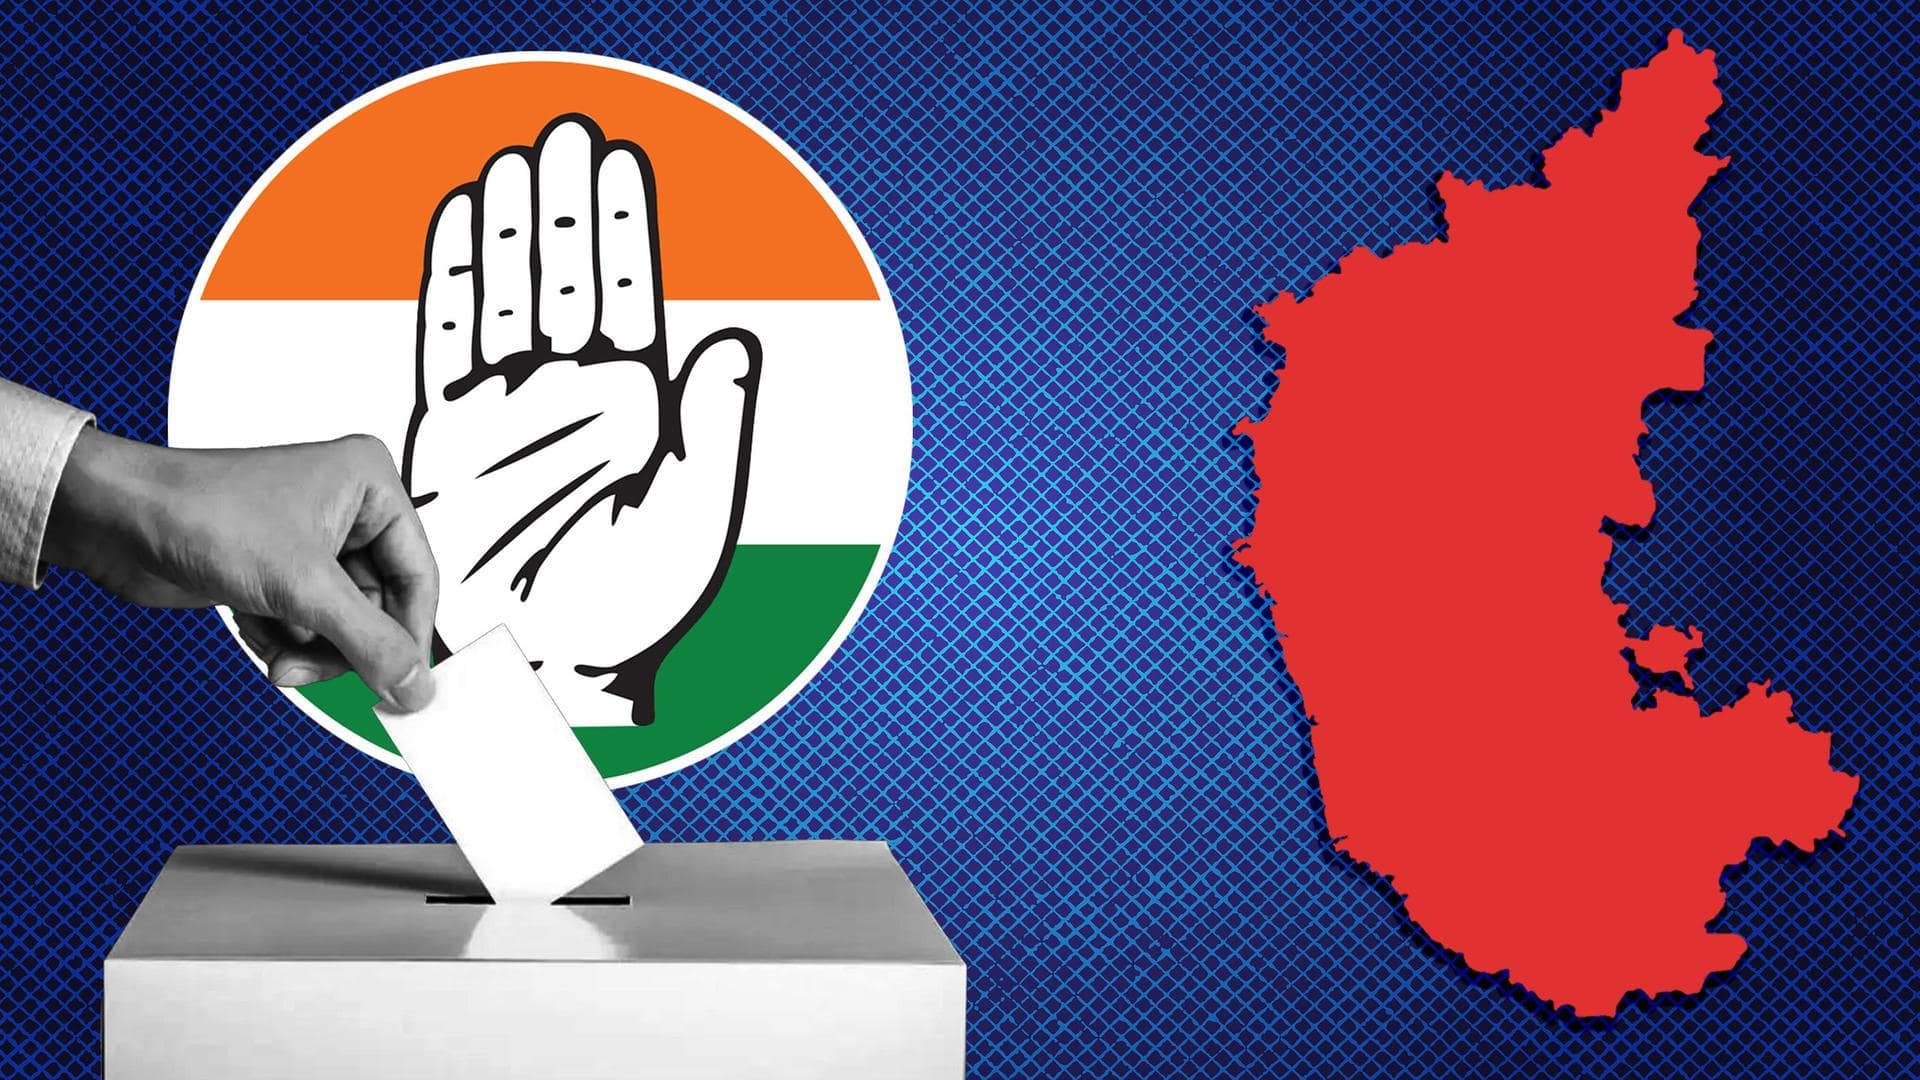 Karnataka Assembly elections: Congress releases 1st list of 124 candidates